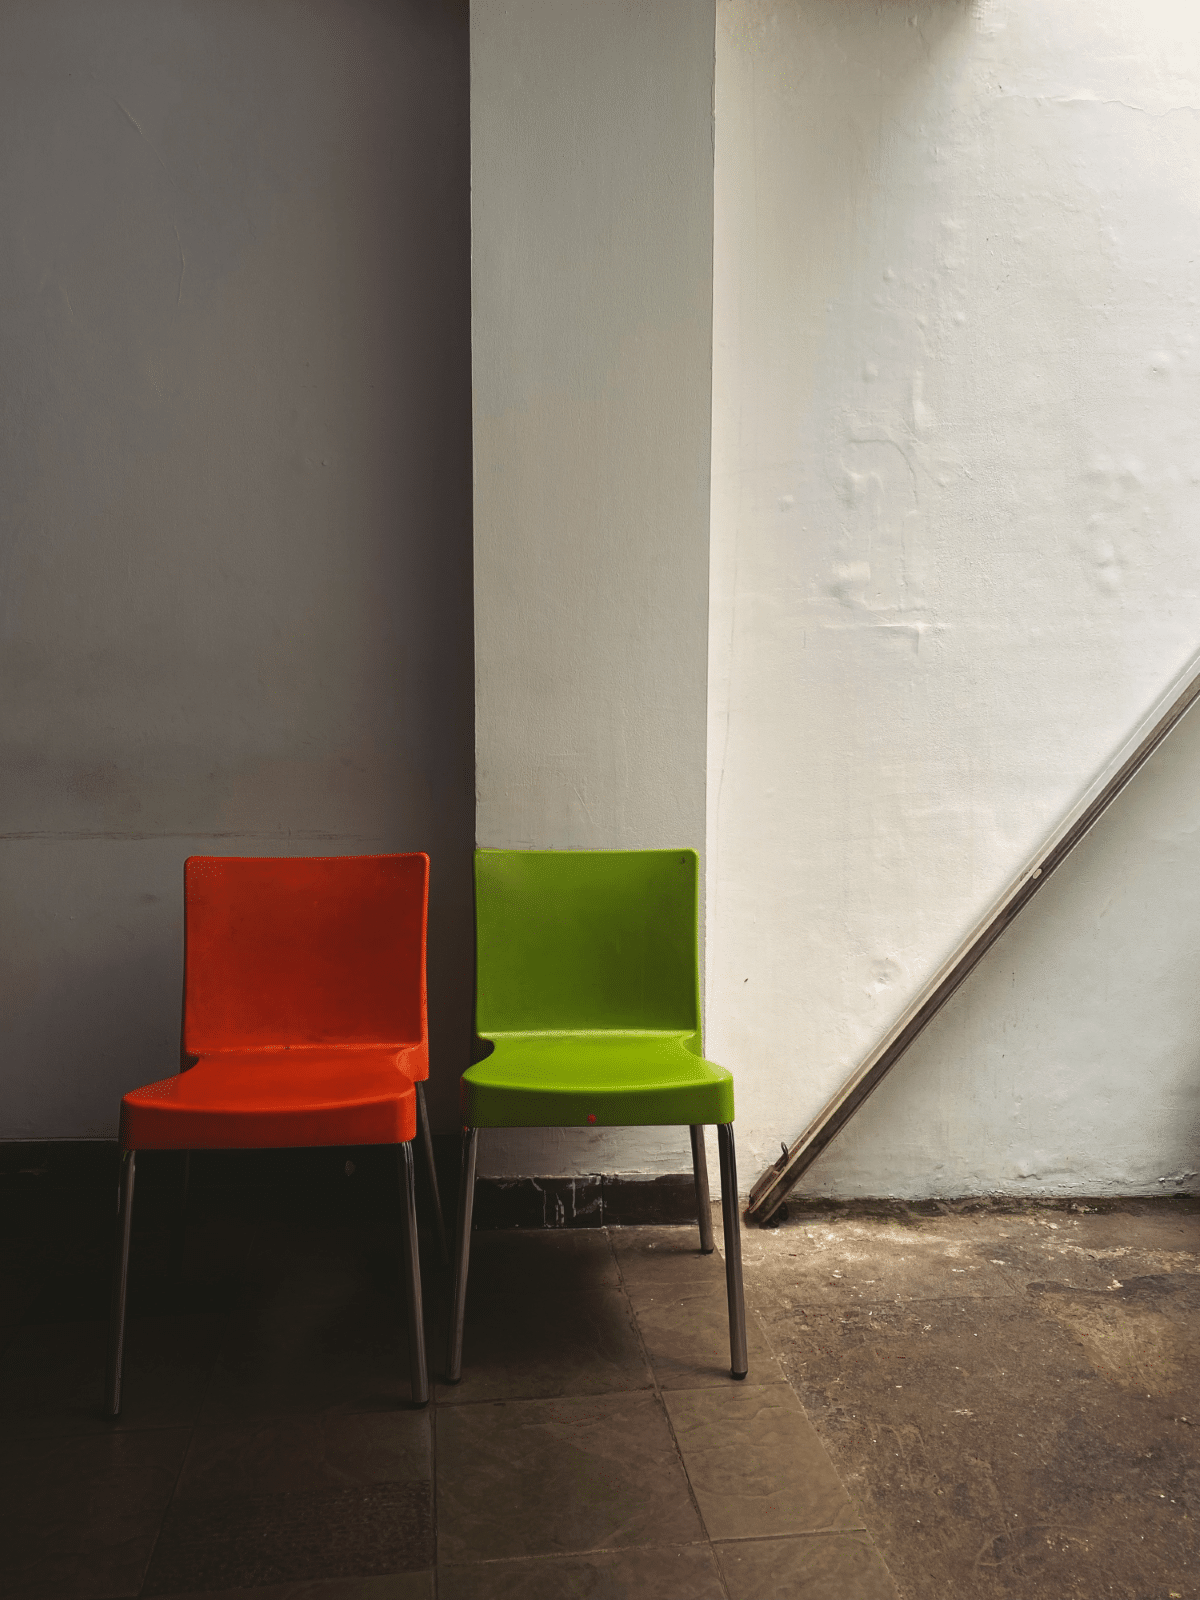 A red and a green chair in a waiting room